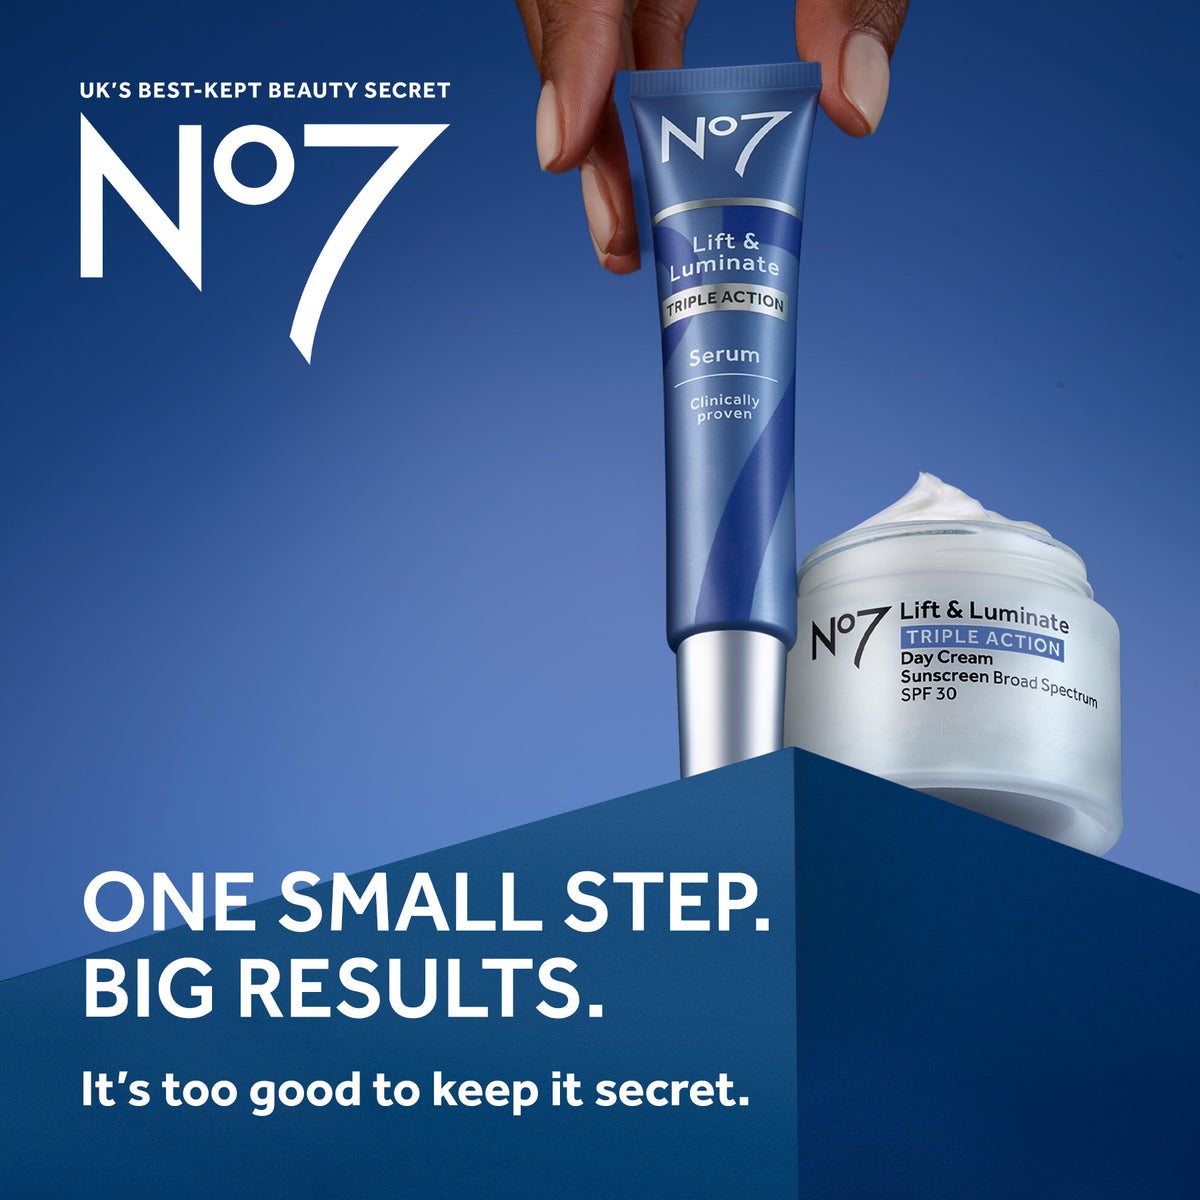 ONE SMALL STEP. BIG RESULTS. Add No7 Lift & Luminate Serum for clinically proven more even looking skin tone. It's too good to keep it secret. Explore the Lift & Luminate range.